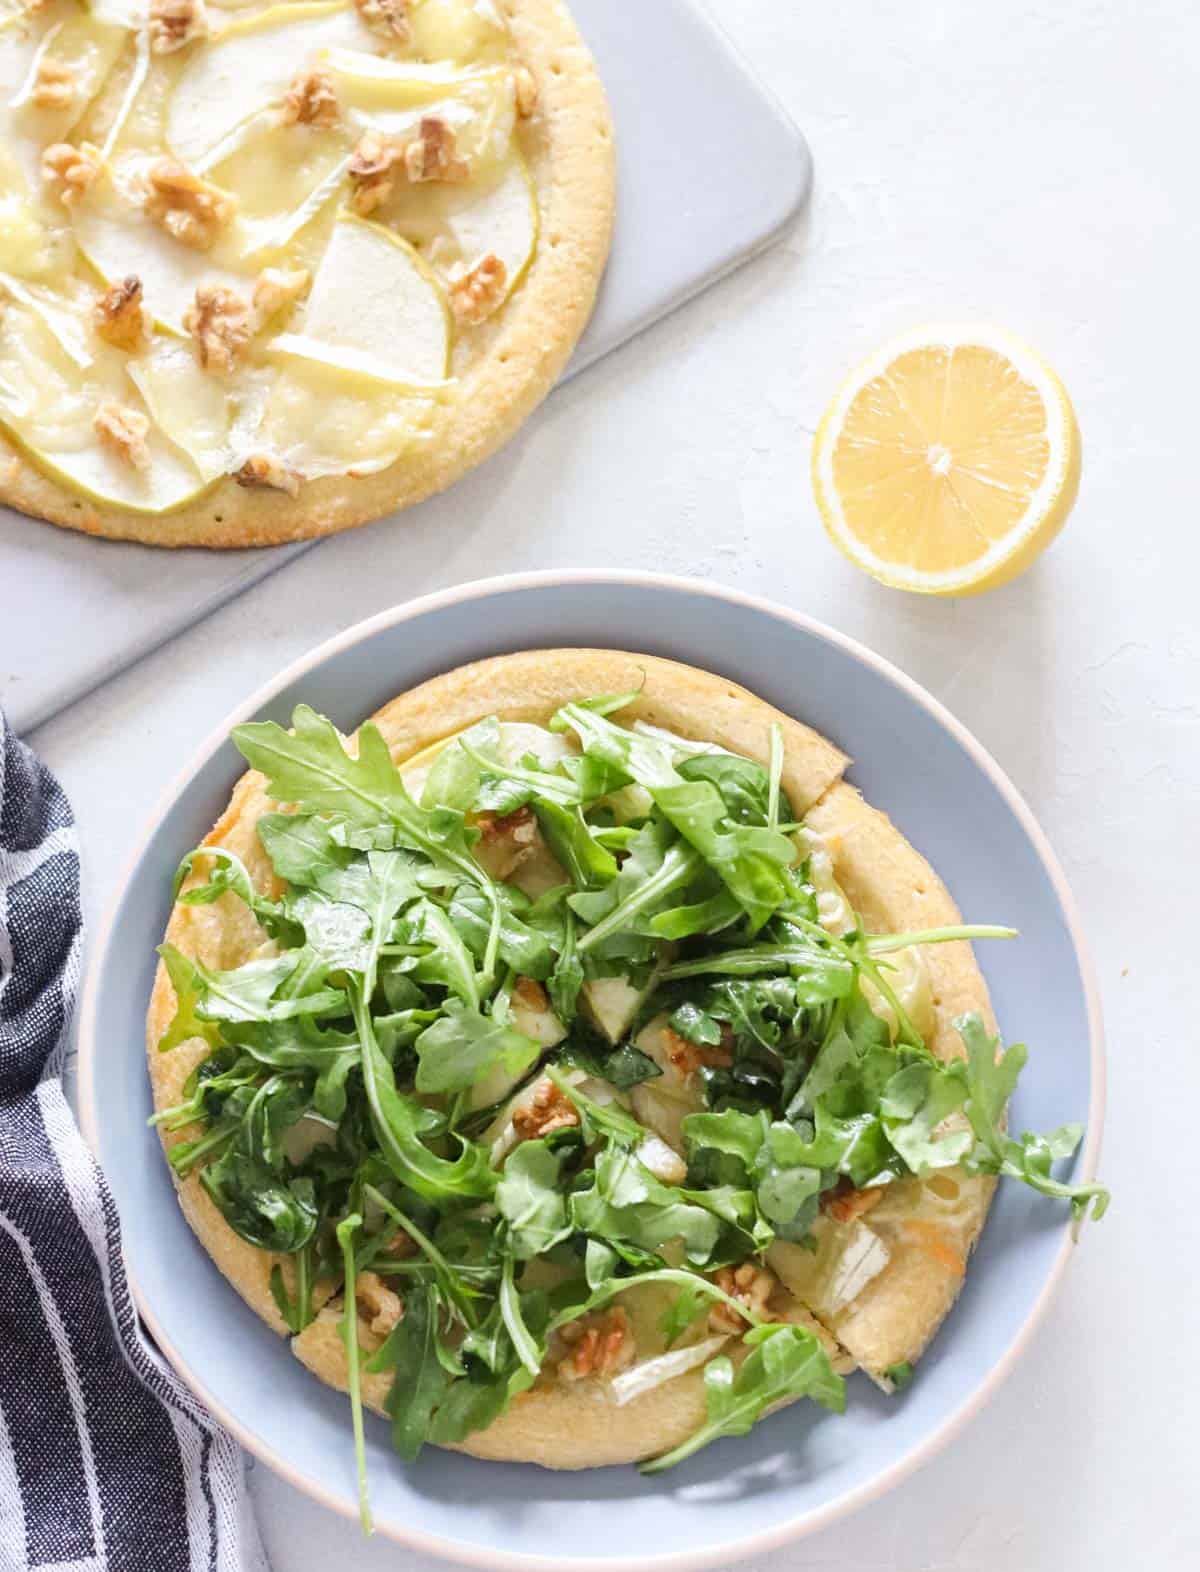 cutting board with brie apple pizza, plate with pizza topped with arugula, cut lemon